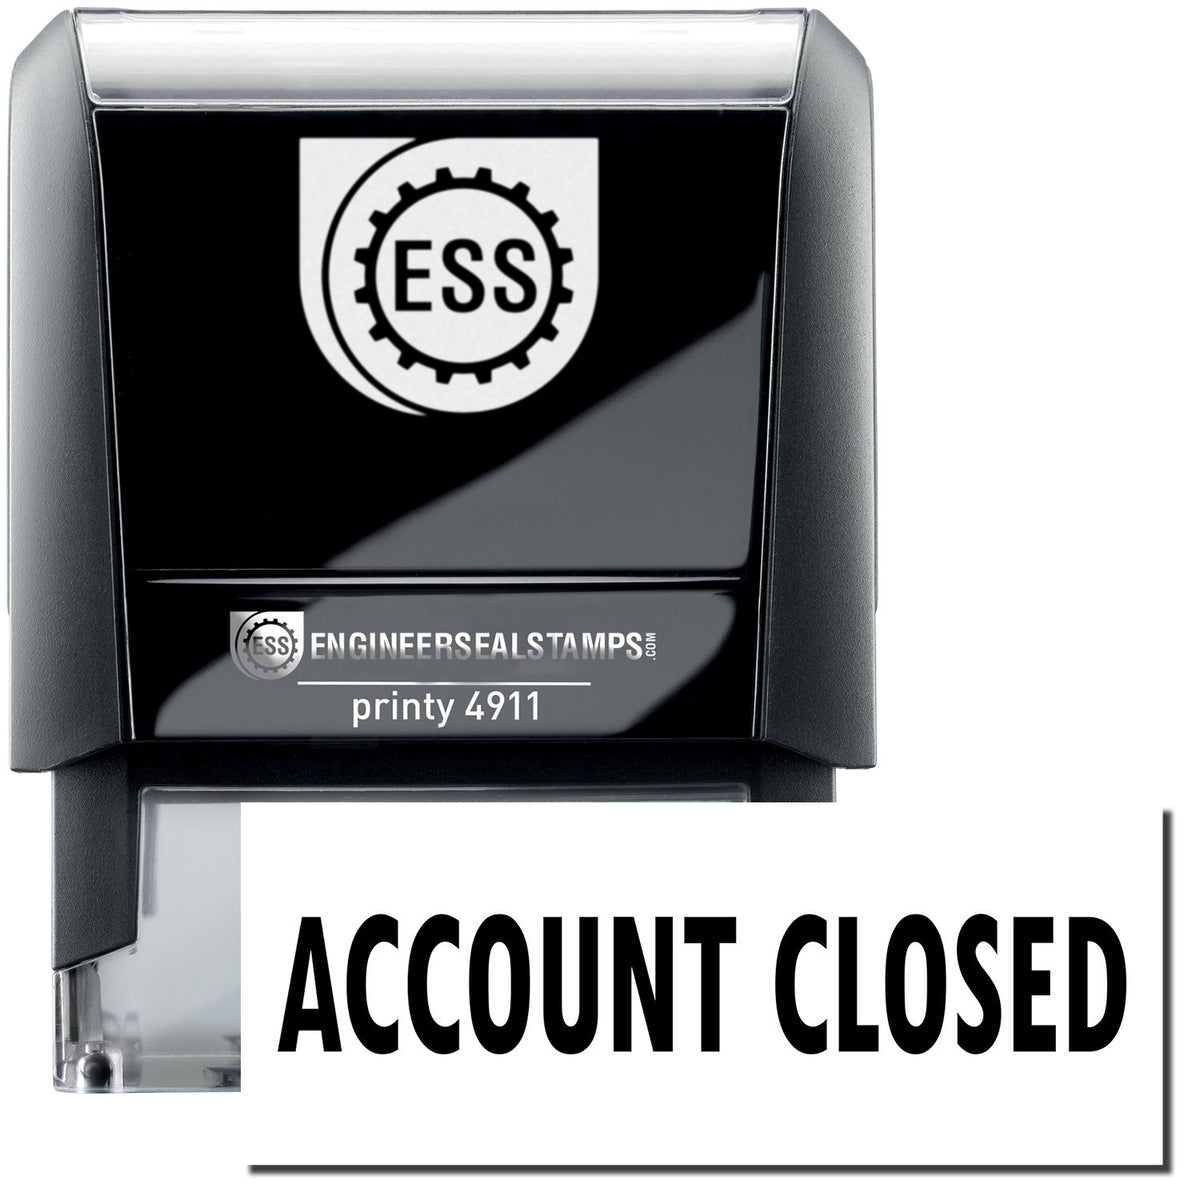 A self-inking stamp with a stamped image showing how the text &quot;ACCOUNT CLOSED&quot; is displayed after stamping.